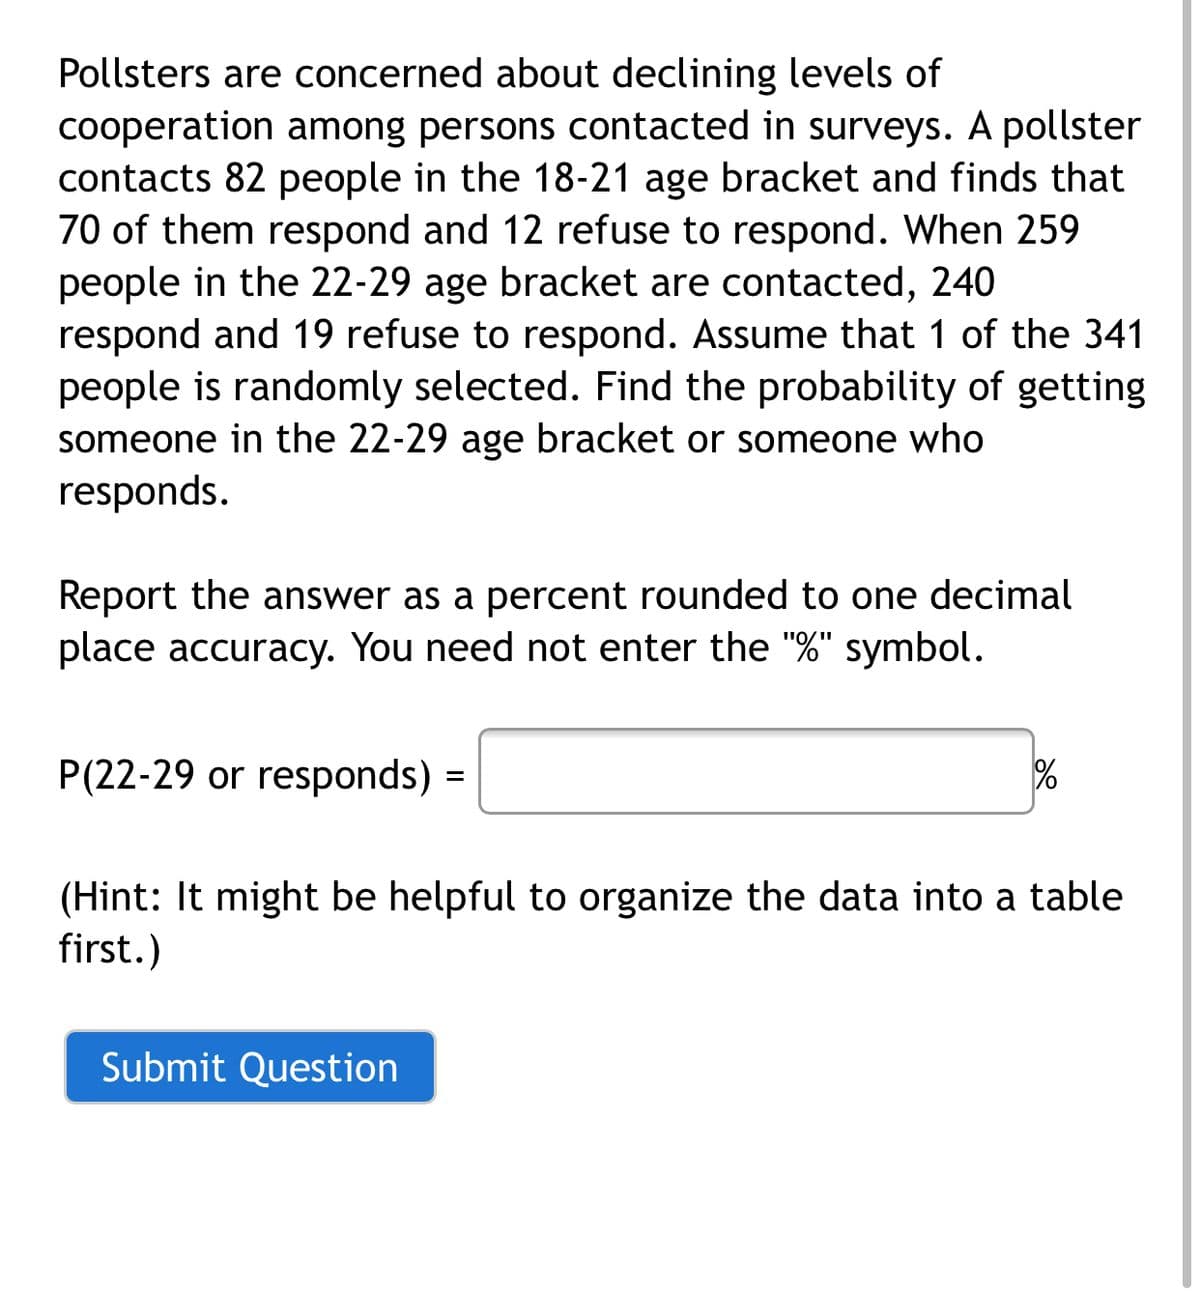 Pollsters are concerned about declining levels of
cooperation among persons contacted in surveys. A pollster
contacts 82 people in the 18-21 age bracket and finds that
70 of them respond and 12 refuse to respond. When 259
people in the 22-29 age bracket are contacted, 240
respond and 19 refuse to respond. Assume that 1 of the 341
people is randomly selected. Find the probability of getting
someone in the 22-29 age bracket or someone who
responds.
Report the answer as a percent rounded to one decimal
place accuracy. You need not enter the "%" symbol.
P(22-29 or responds)
(Hint: It might be helpful to organize the data into a table
first.)
Submit Question
